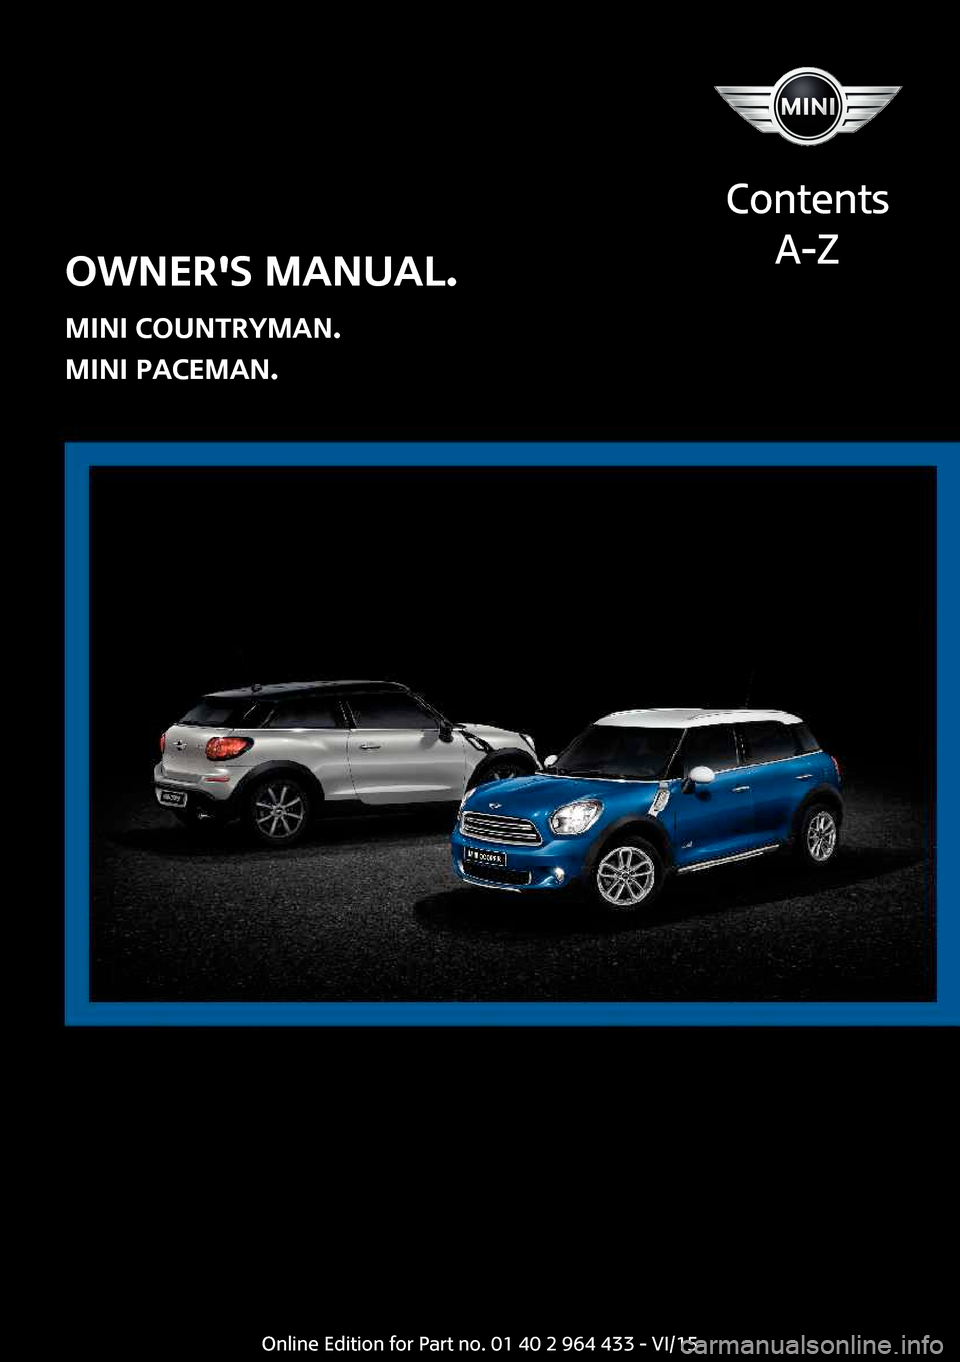 MINI Countryman 2016  Owners Manual OWNERS MANUAL.
MINI COUNTRYMAN.
MINI PACEMAN.
Contents
A-ZOnline Edition for Part no. 01 40 2 964 433 - VI/15  